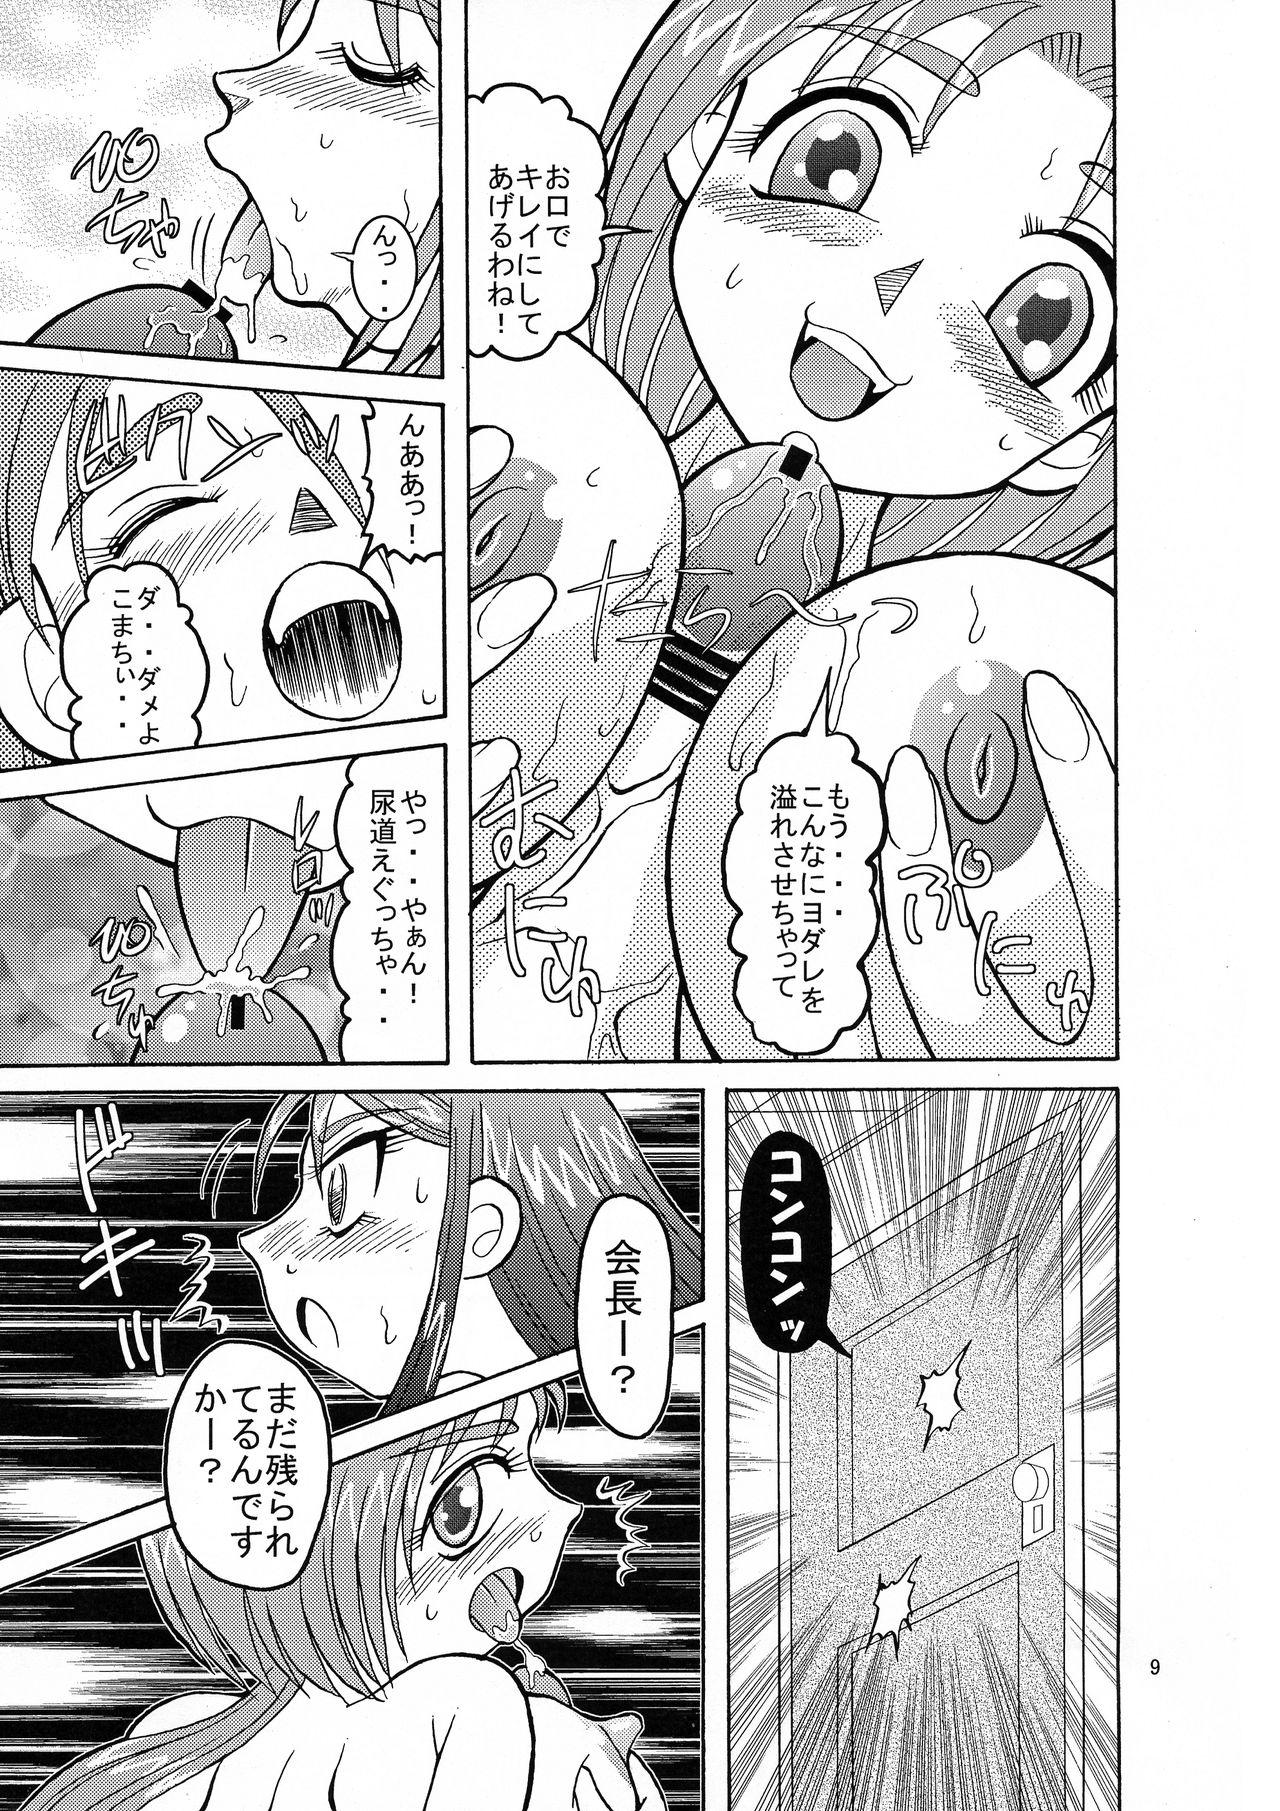 Fat Pussy Komakare GO! GO! - Yes precure 5 Pov Blow Job - Page 9